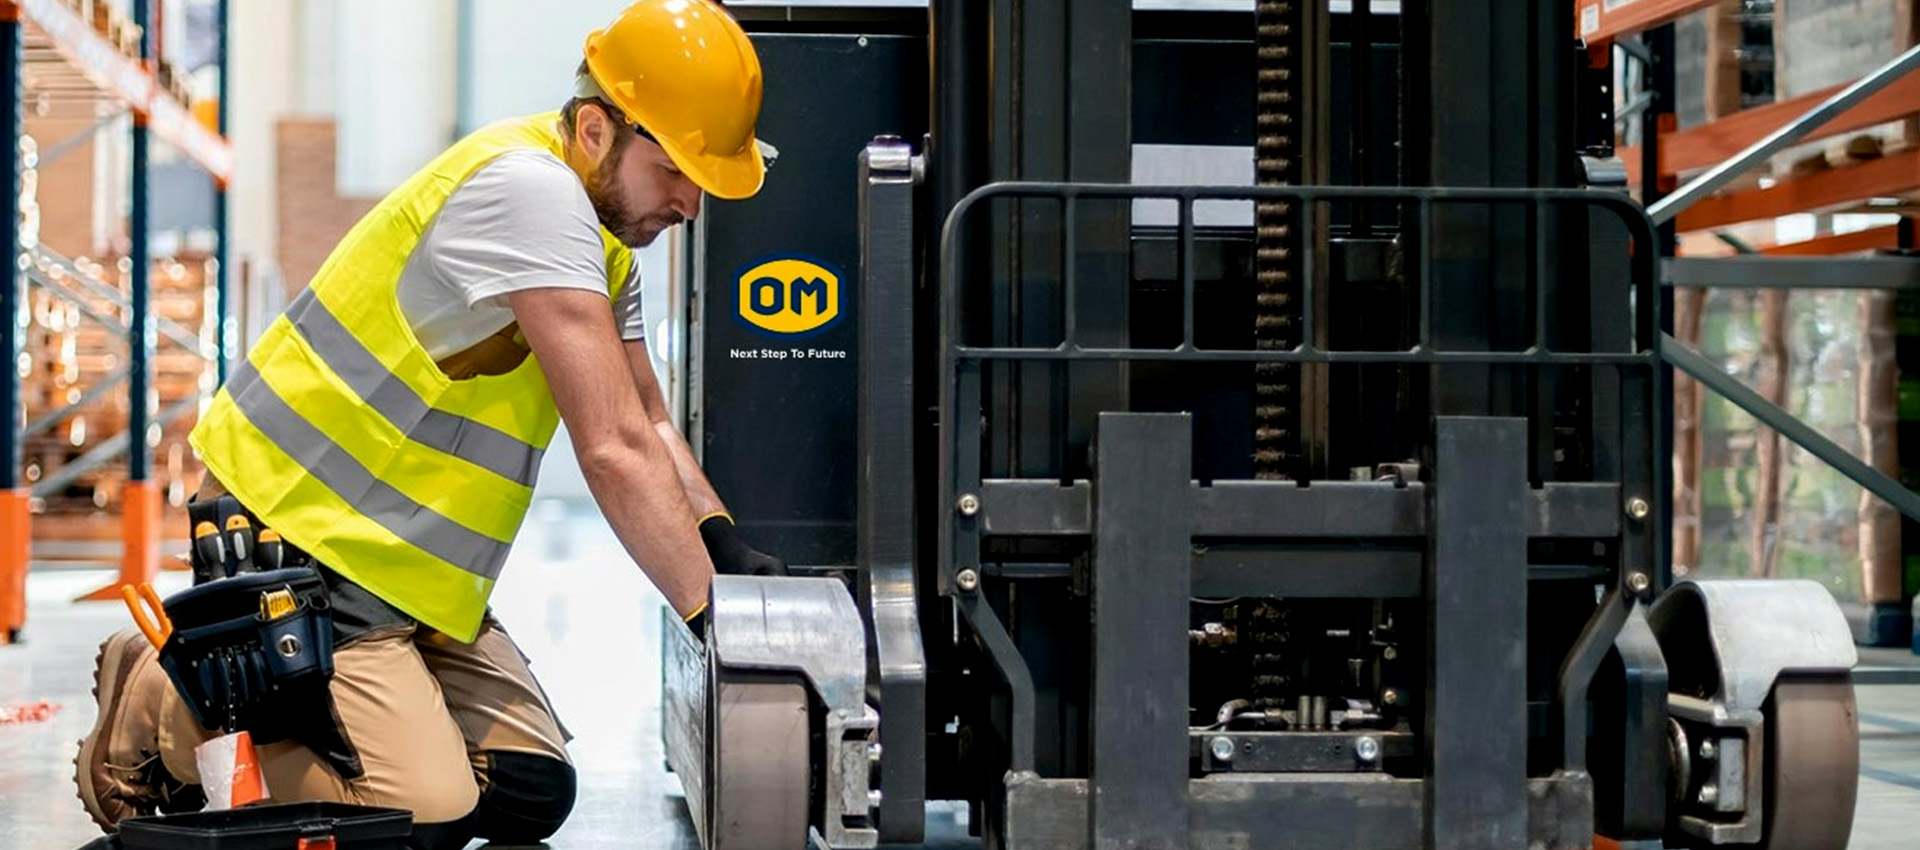 Get the most out of your forklift with these maintenance tips